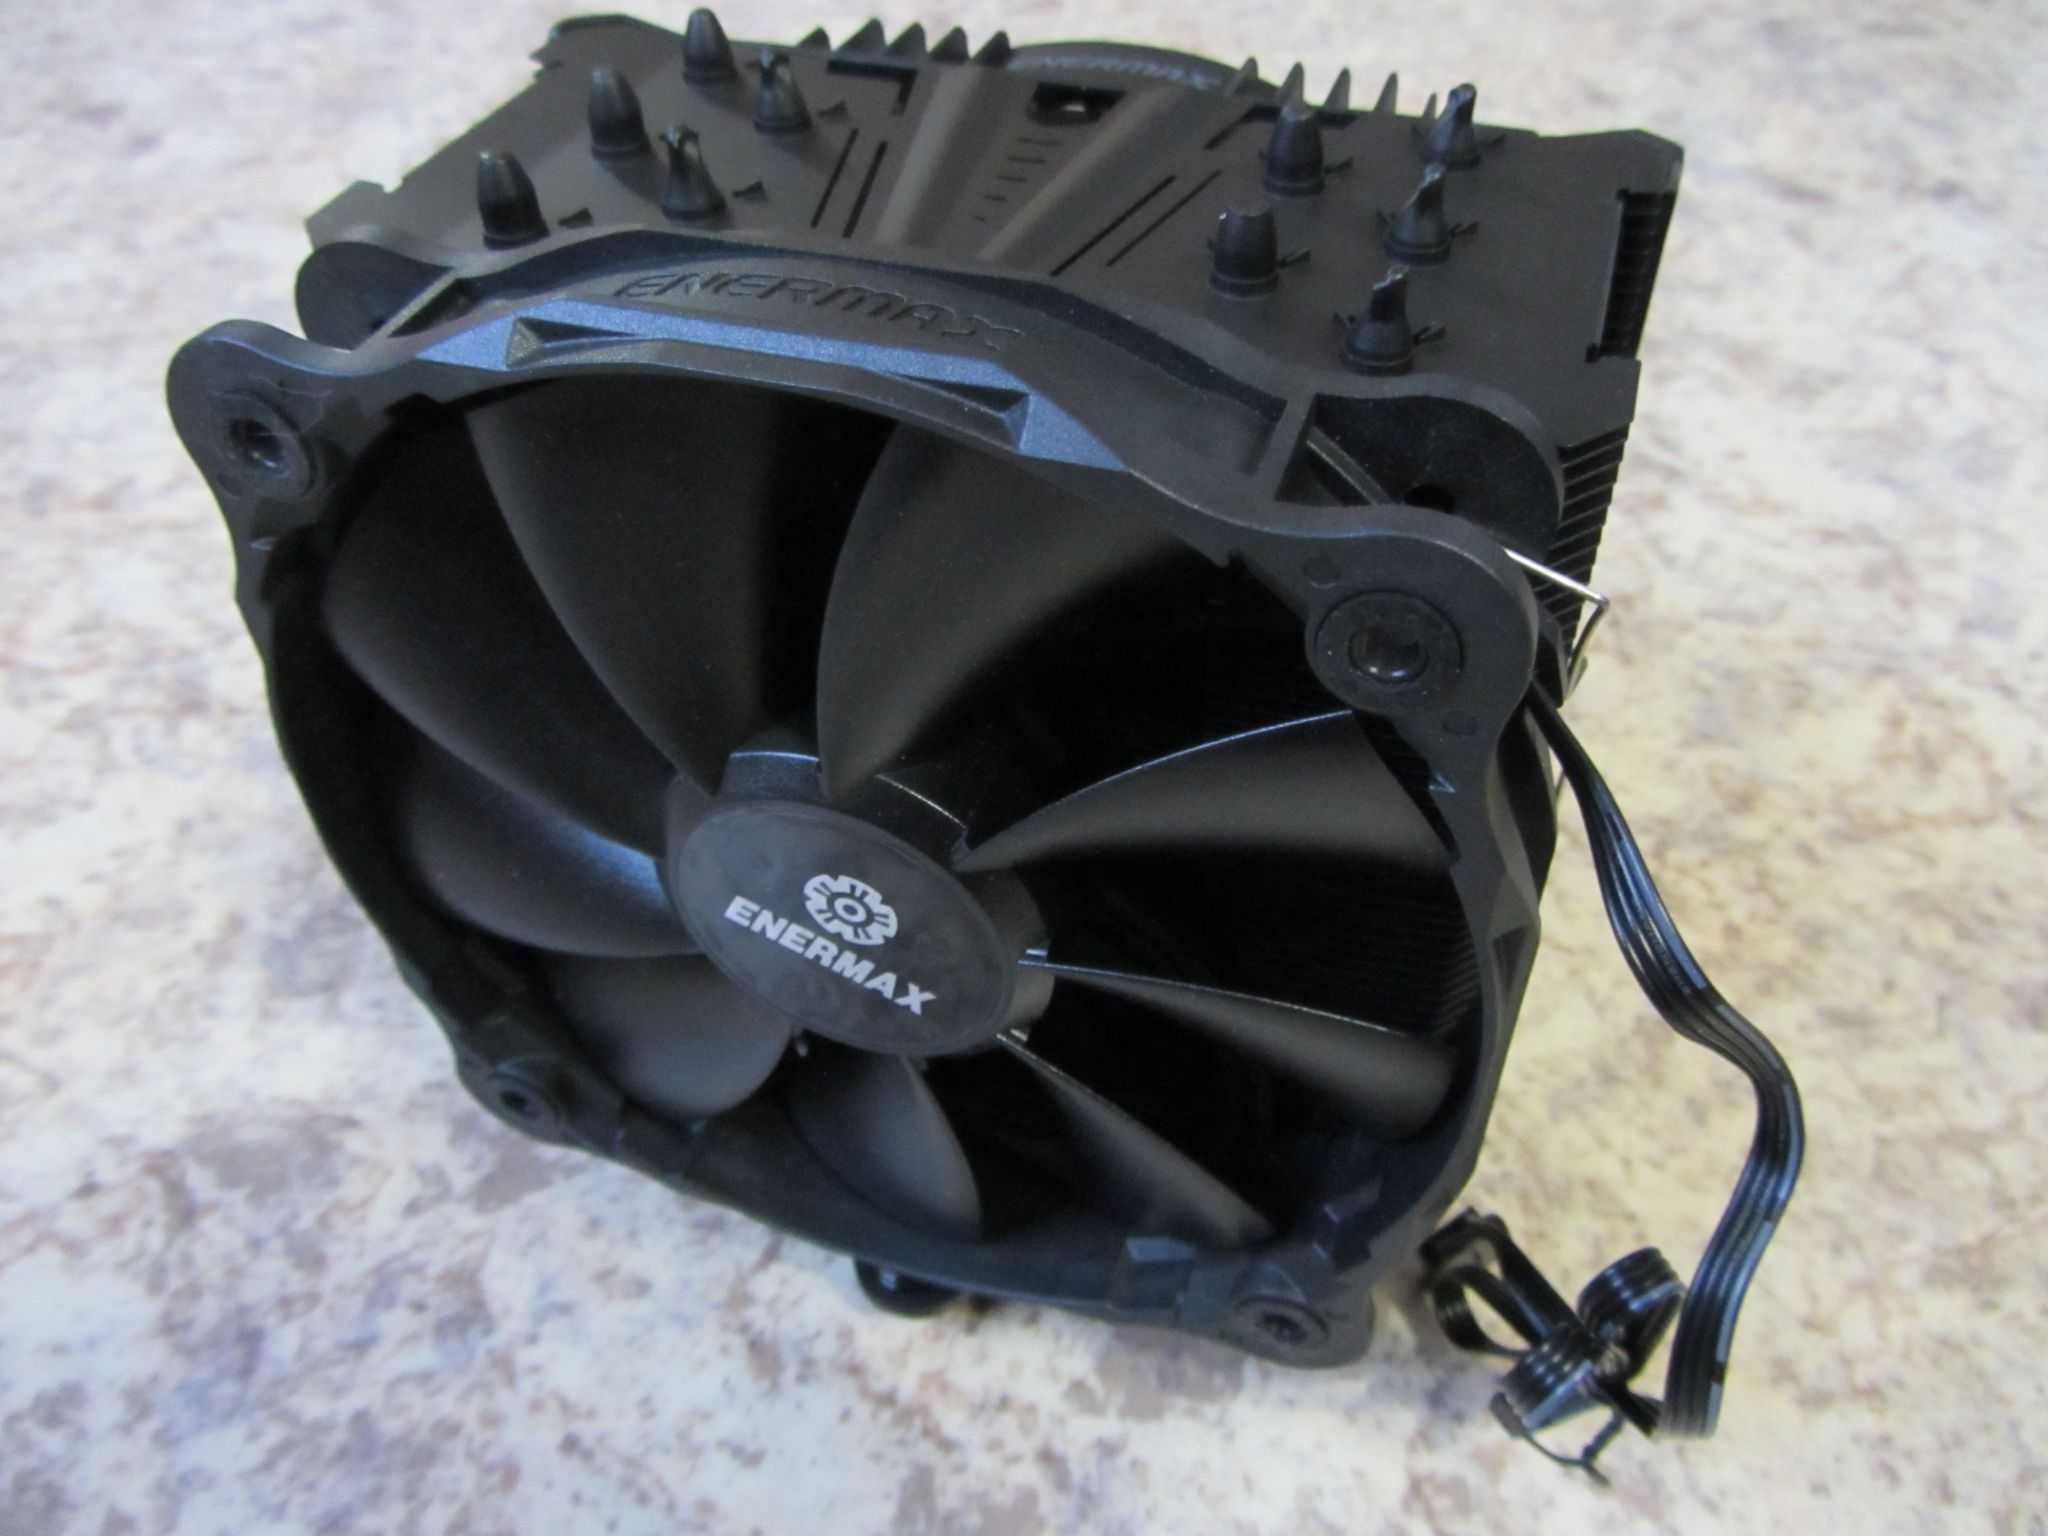 Enermax ets-t50 axe cooler review: solid-value air cooling